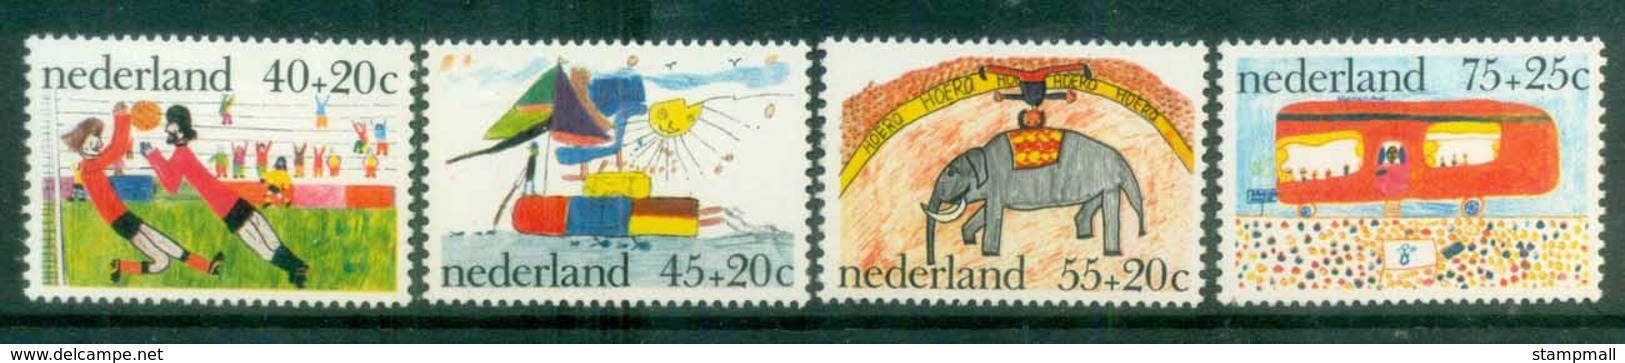 Netherlands 1976 Charity, Child Welfare, Children's Drawings MUH Lot76585 - Unclassified